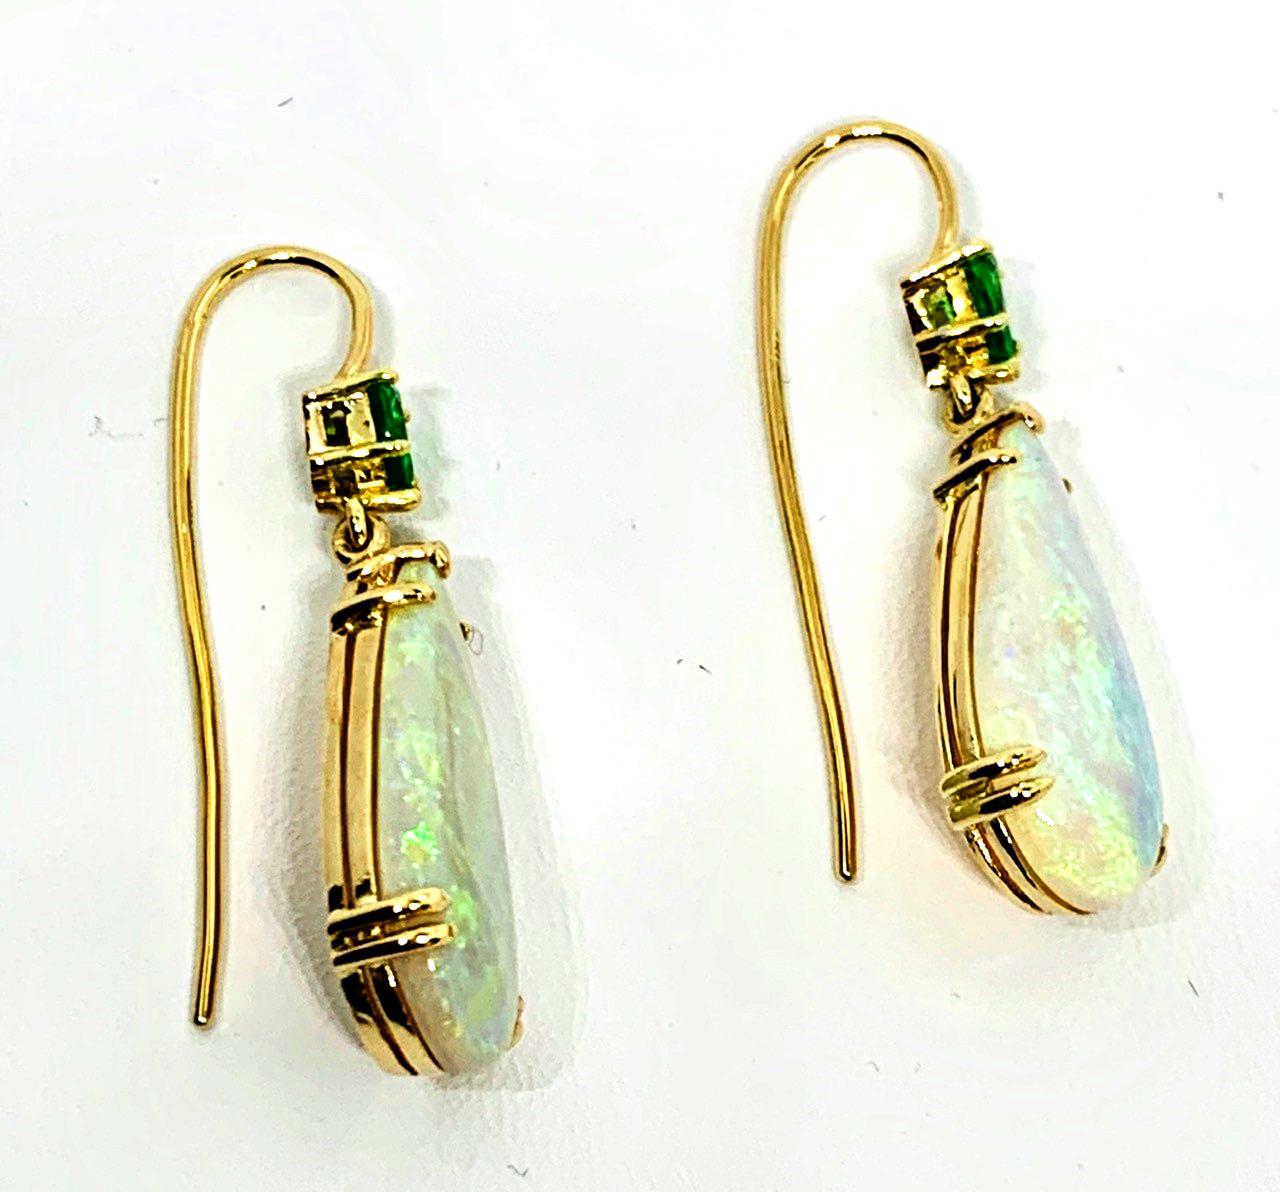 These stylish drop earrings feature beautifully kaleidoscopic opals and bright green tsavorite garnets set in 18k yellow gold. The large, colorful pear-shaped gems are beautifully matched and pair perfectly with the sparkling  African green garnets.